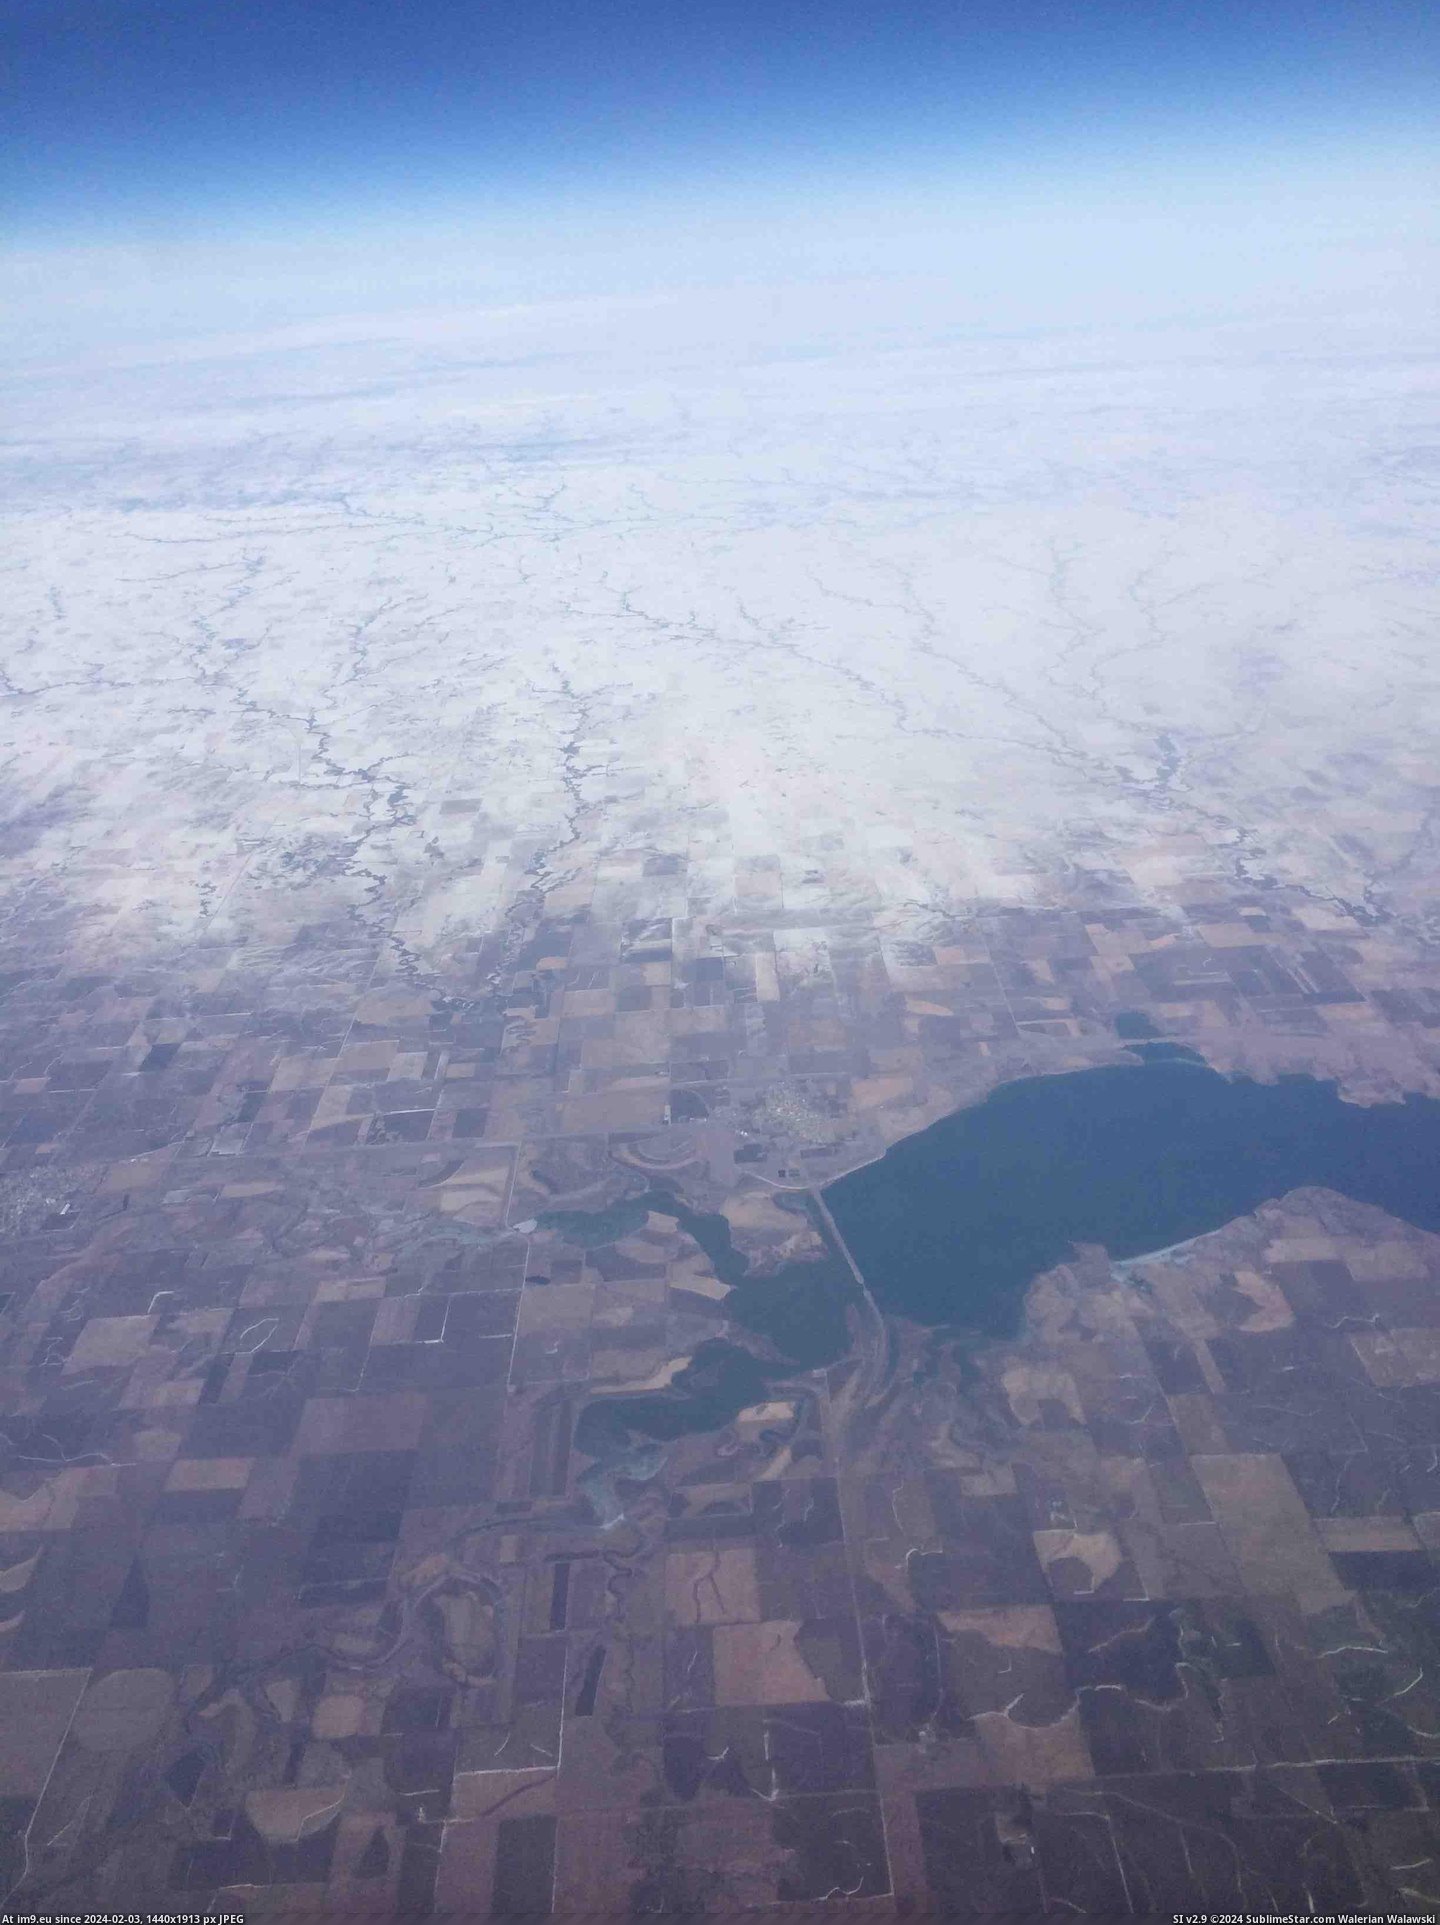 #Hit #Weekend #Flew #Snowstorm #Chicago #Edge [Mildlyinteresting] I flew over the edge of the snowstorm that hit Chicago last weekend. Pic. (Obraz z album My r/MILDLYINTERESTING favs))